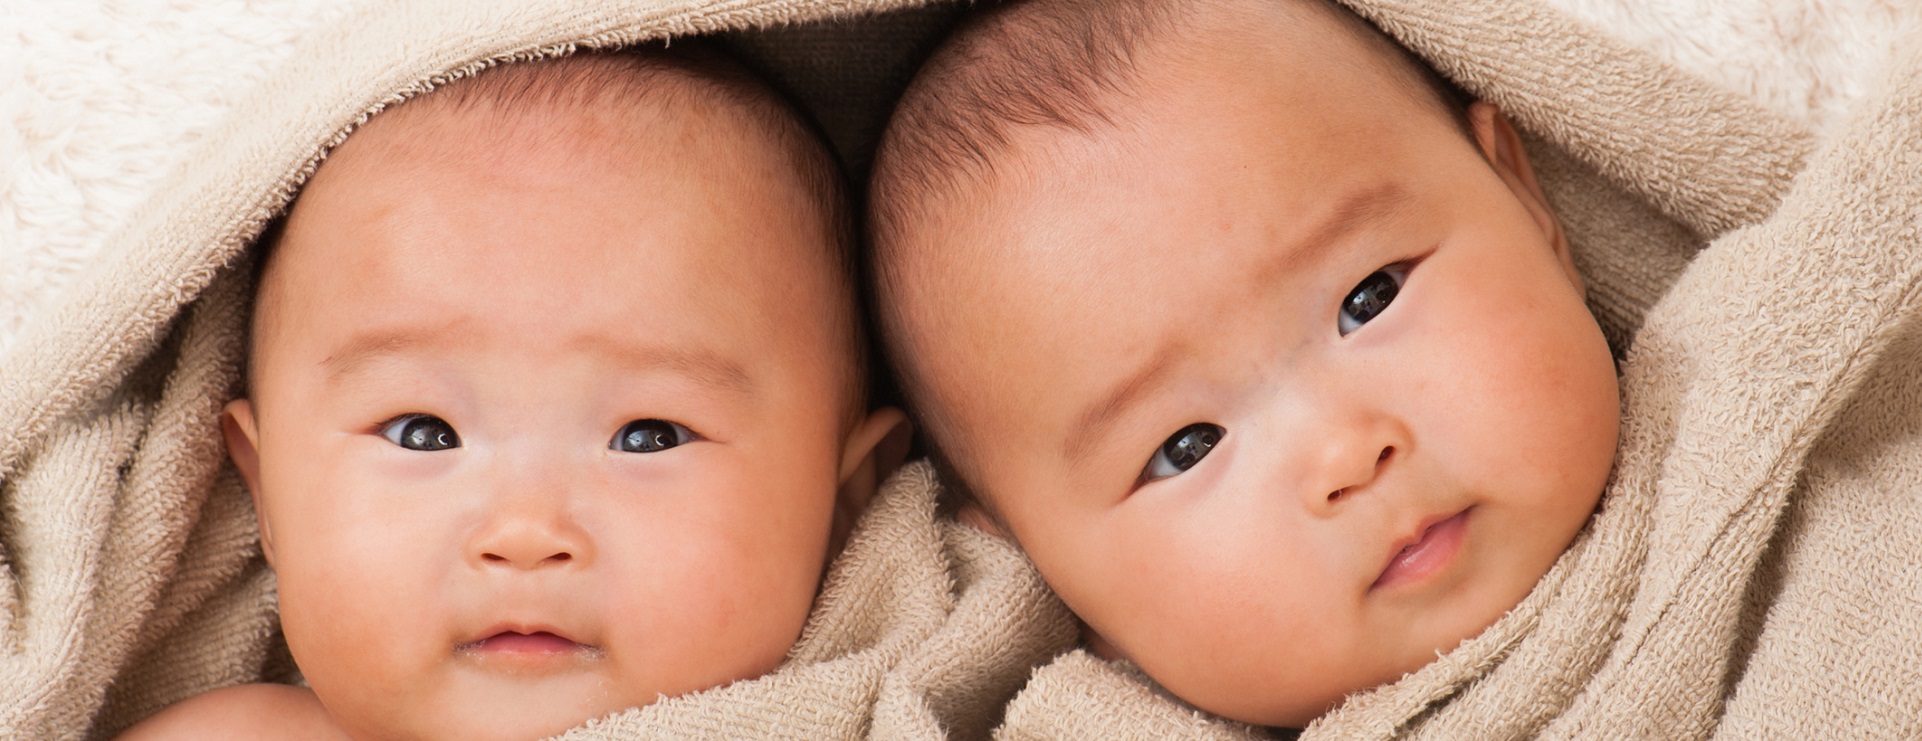 Twin Pregnancy: Answers from an Expert | Johns Hopkins Medicine